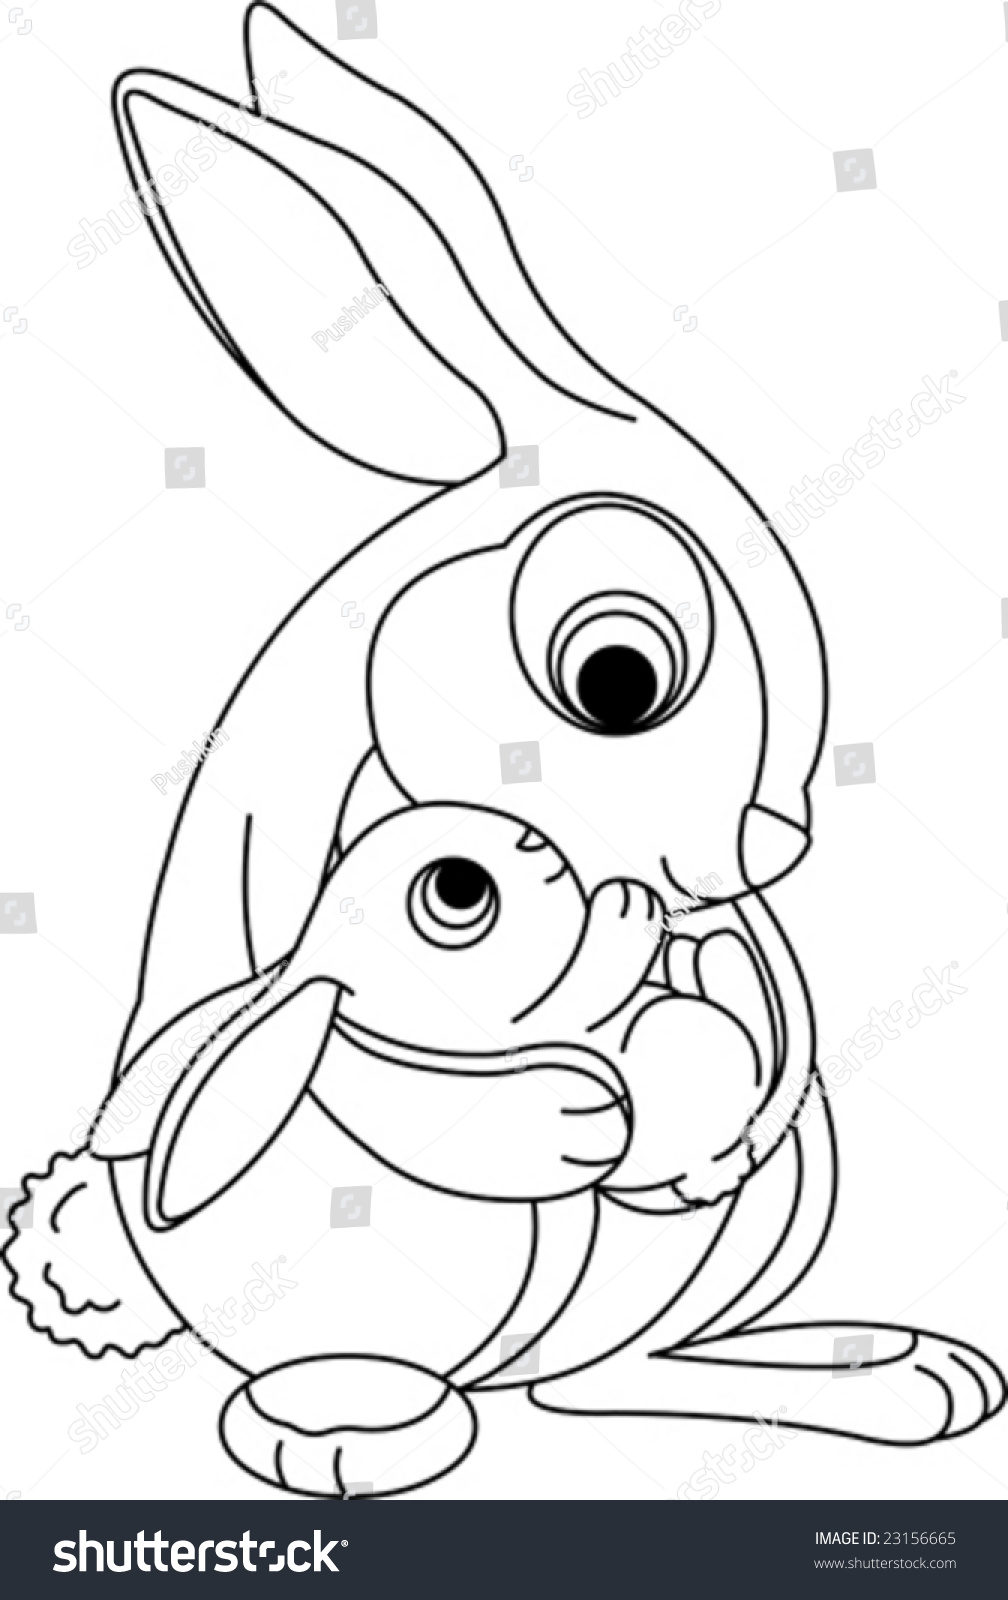 Cute Rabbits Mother Holding Her Baby Stock Vector 23156665 - Shutterstock